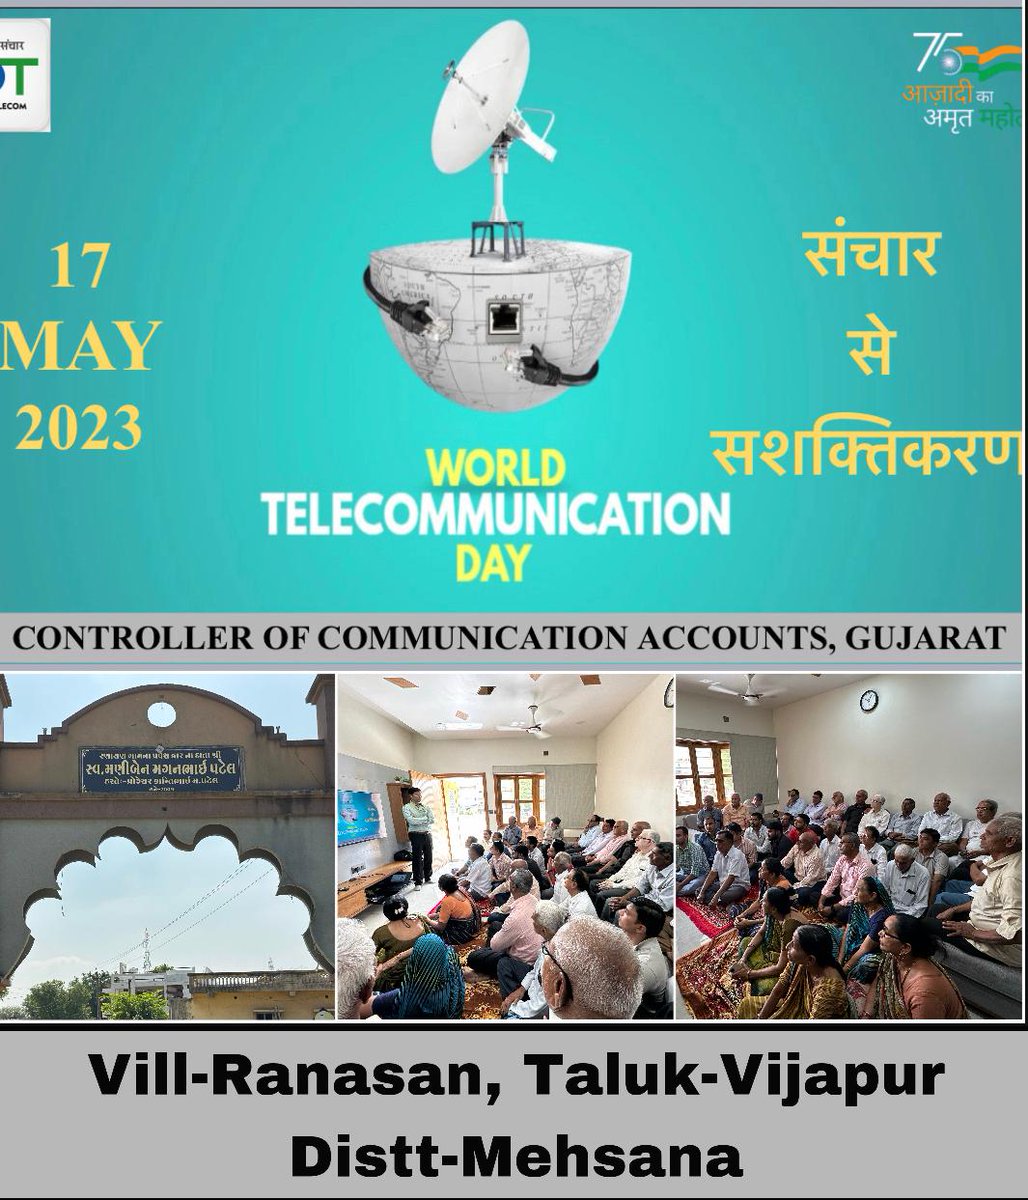 Today on #WorldTelecomDay2023, outreach program was conducted with rural people on #TelecomForEmpowerment in Mehsana District Gujarat

Program was attended by Senior Citizens and Women. @USOF schemes, #BharatNet #DigitalInitiatives #SancharSaathi were discussed among other things